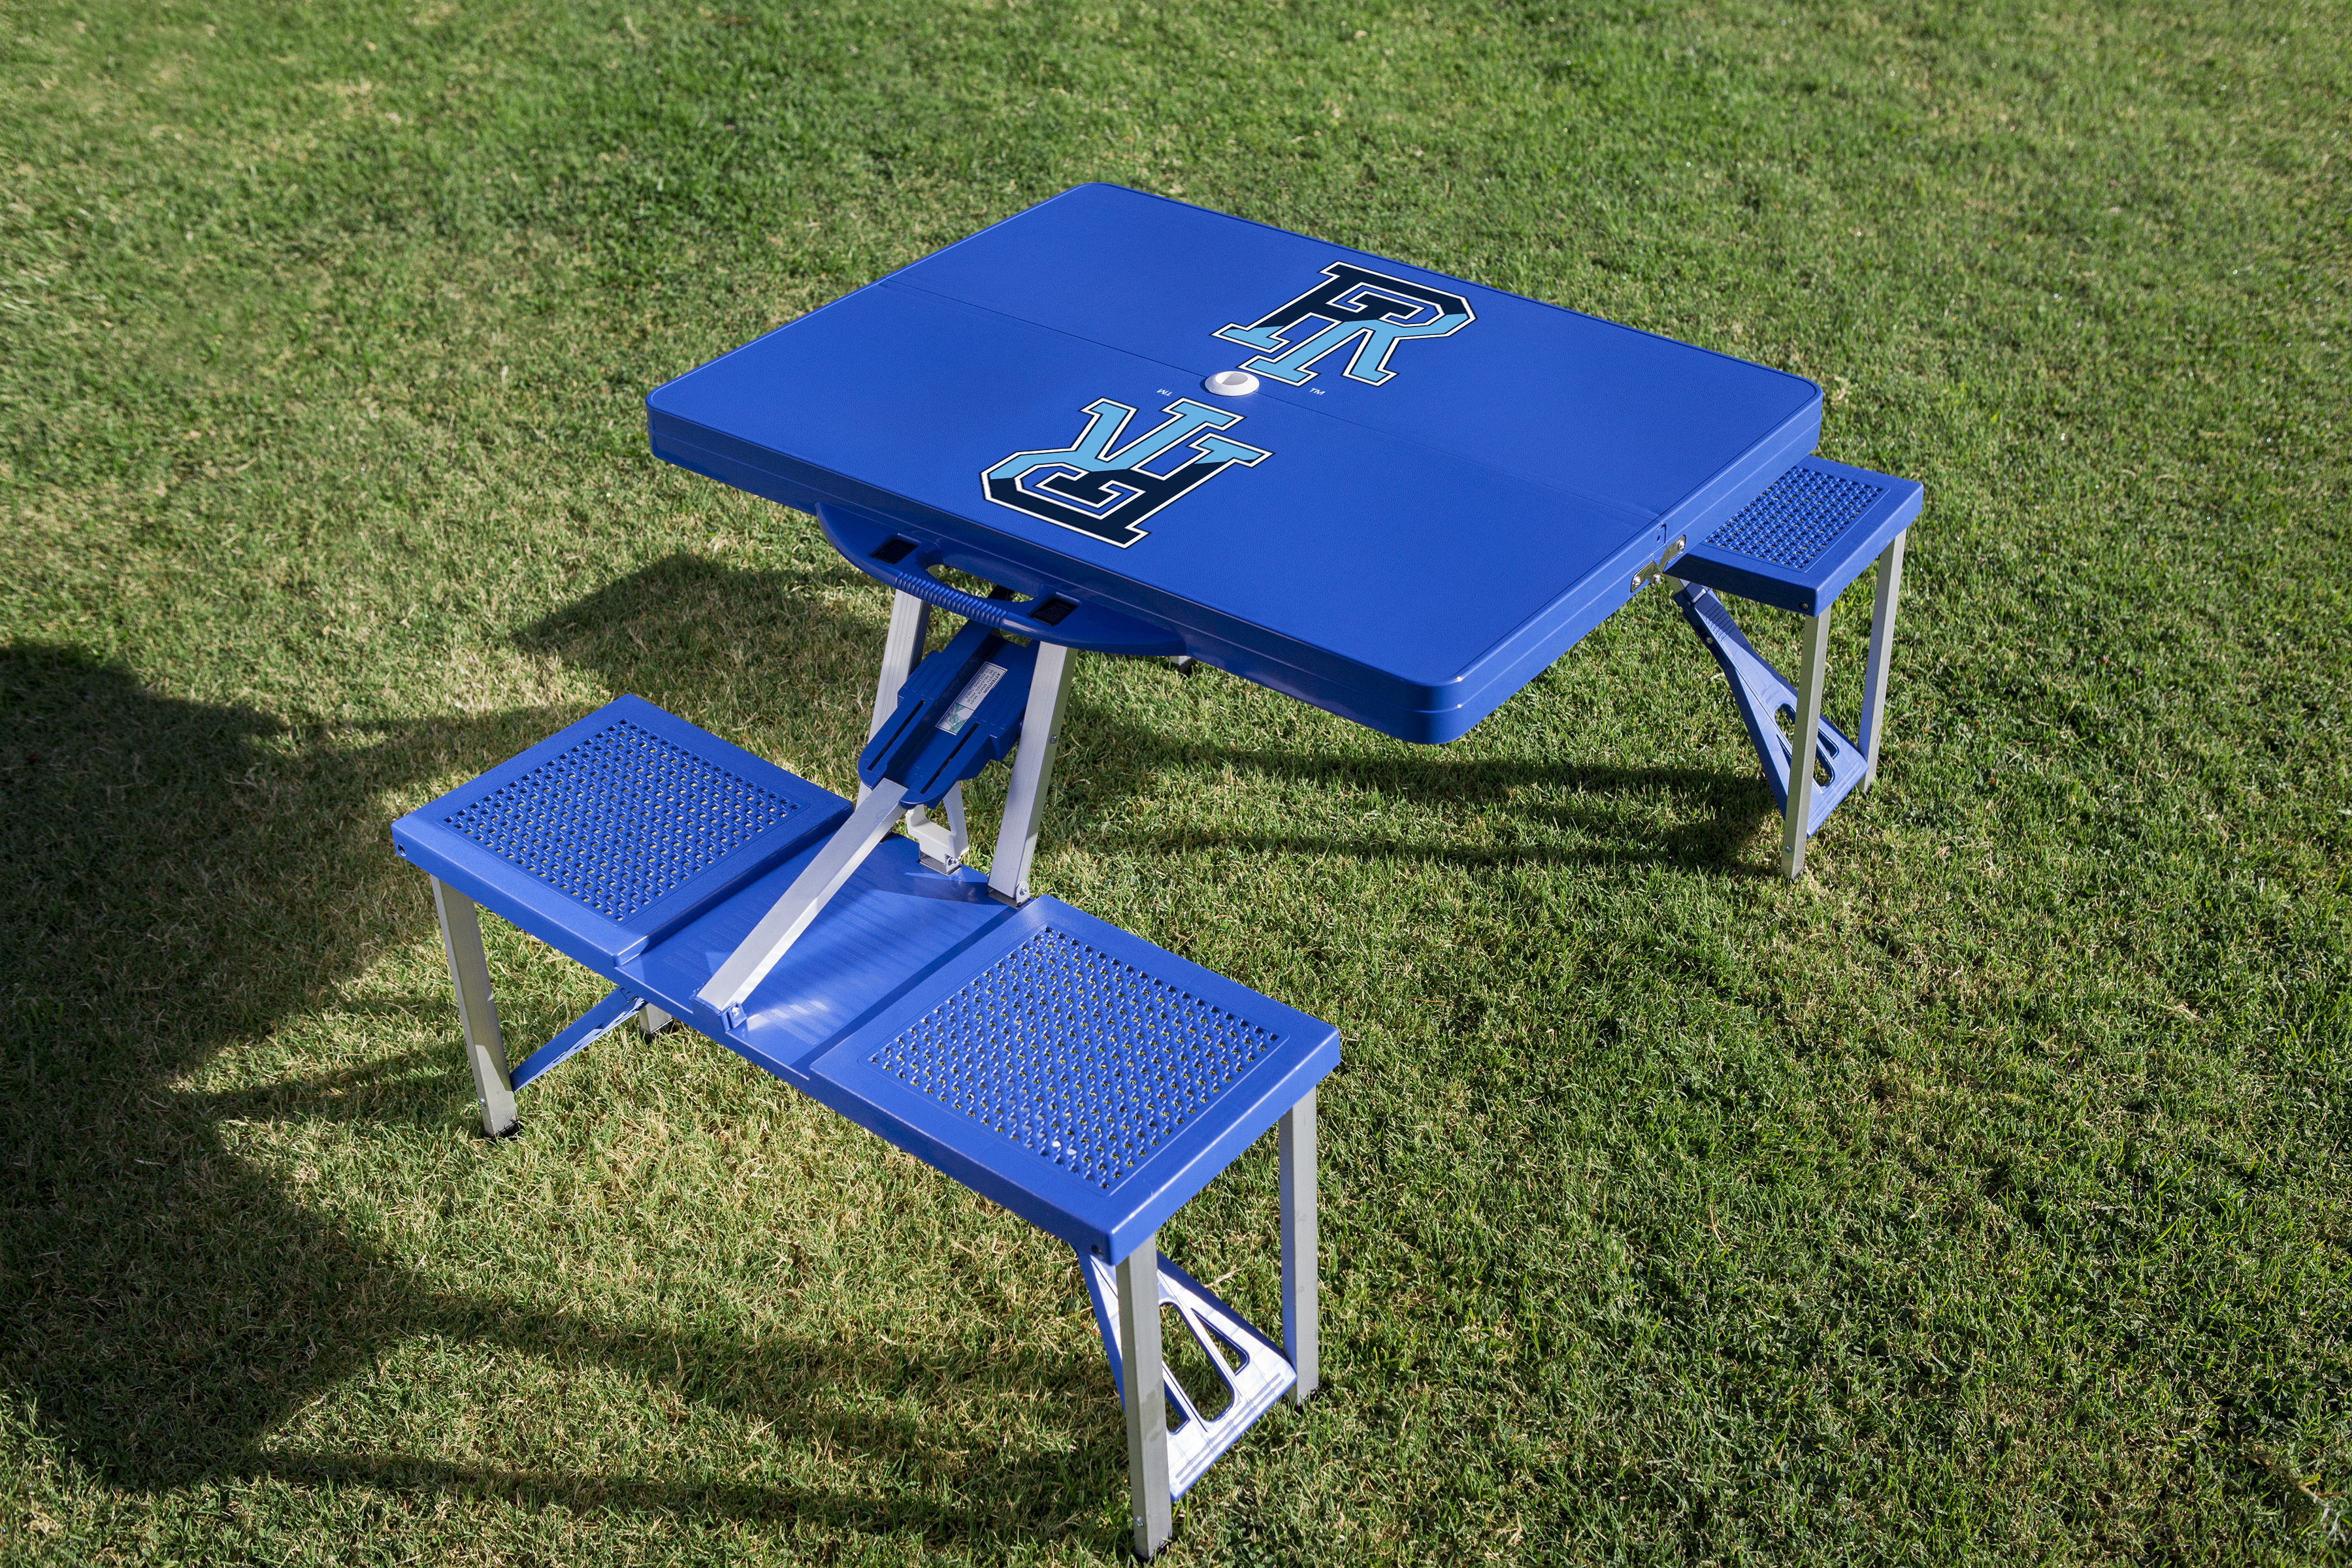 Rhode Island Rams - Picnic Table Portable Folding Table with Seats